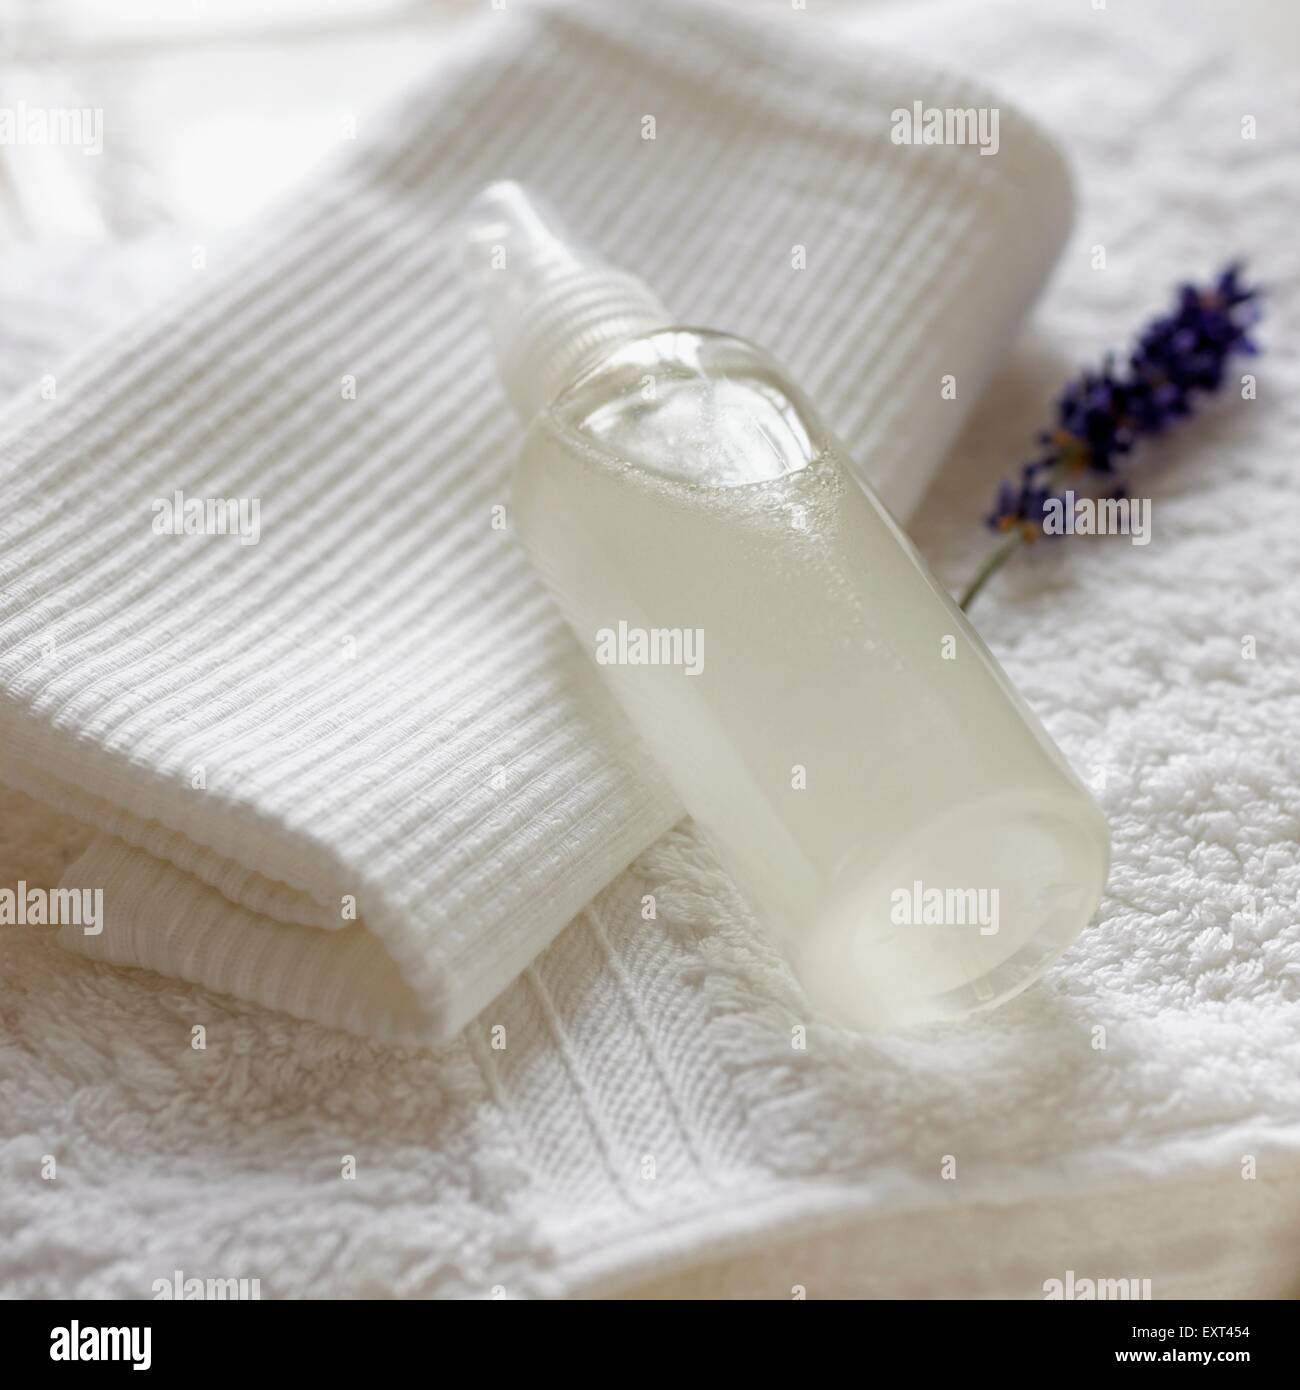 Bottle of witch hazel (hamamelis) and lavender deodorant, on a towel, close-up Stock Photo